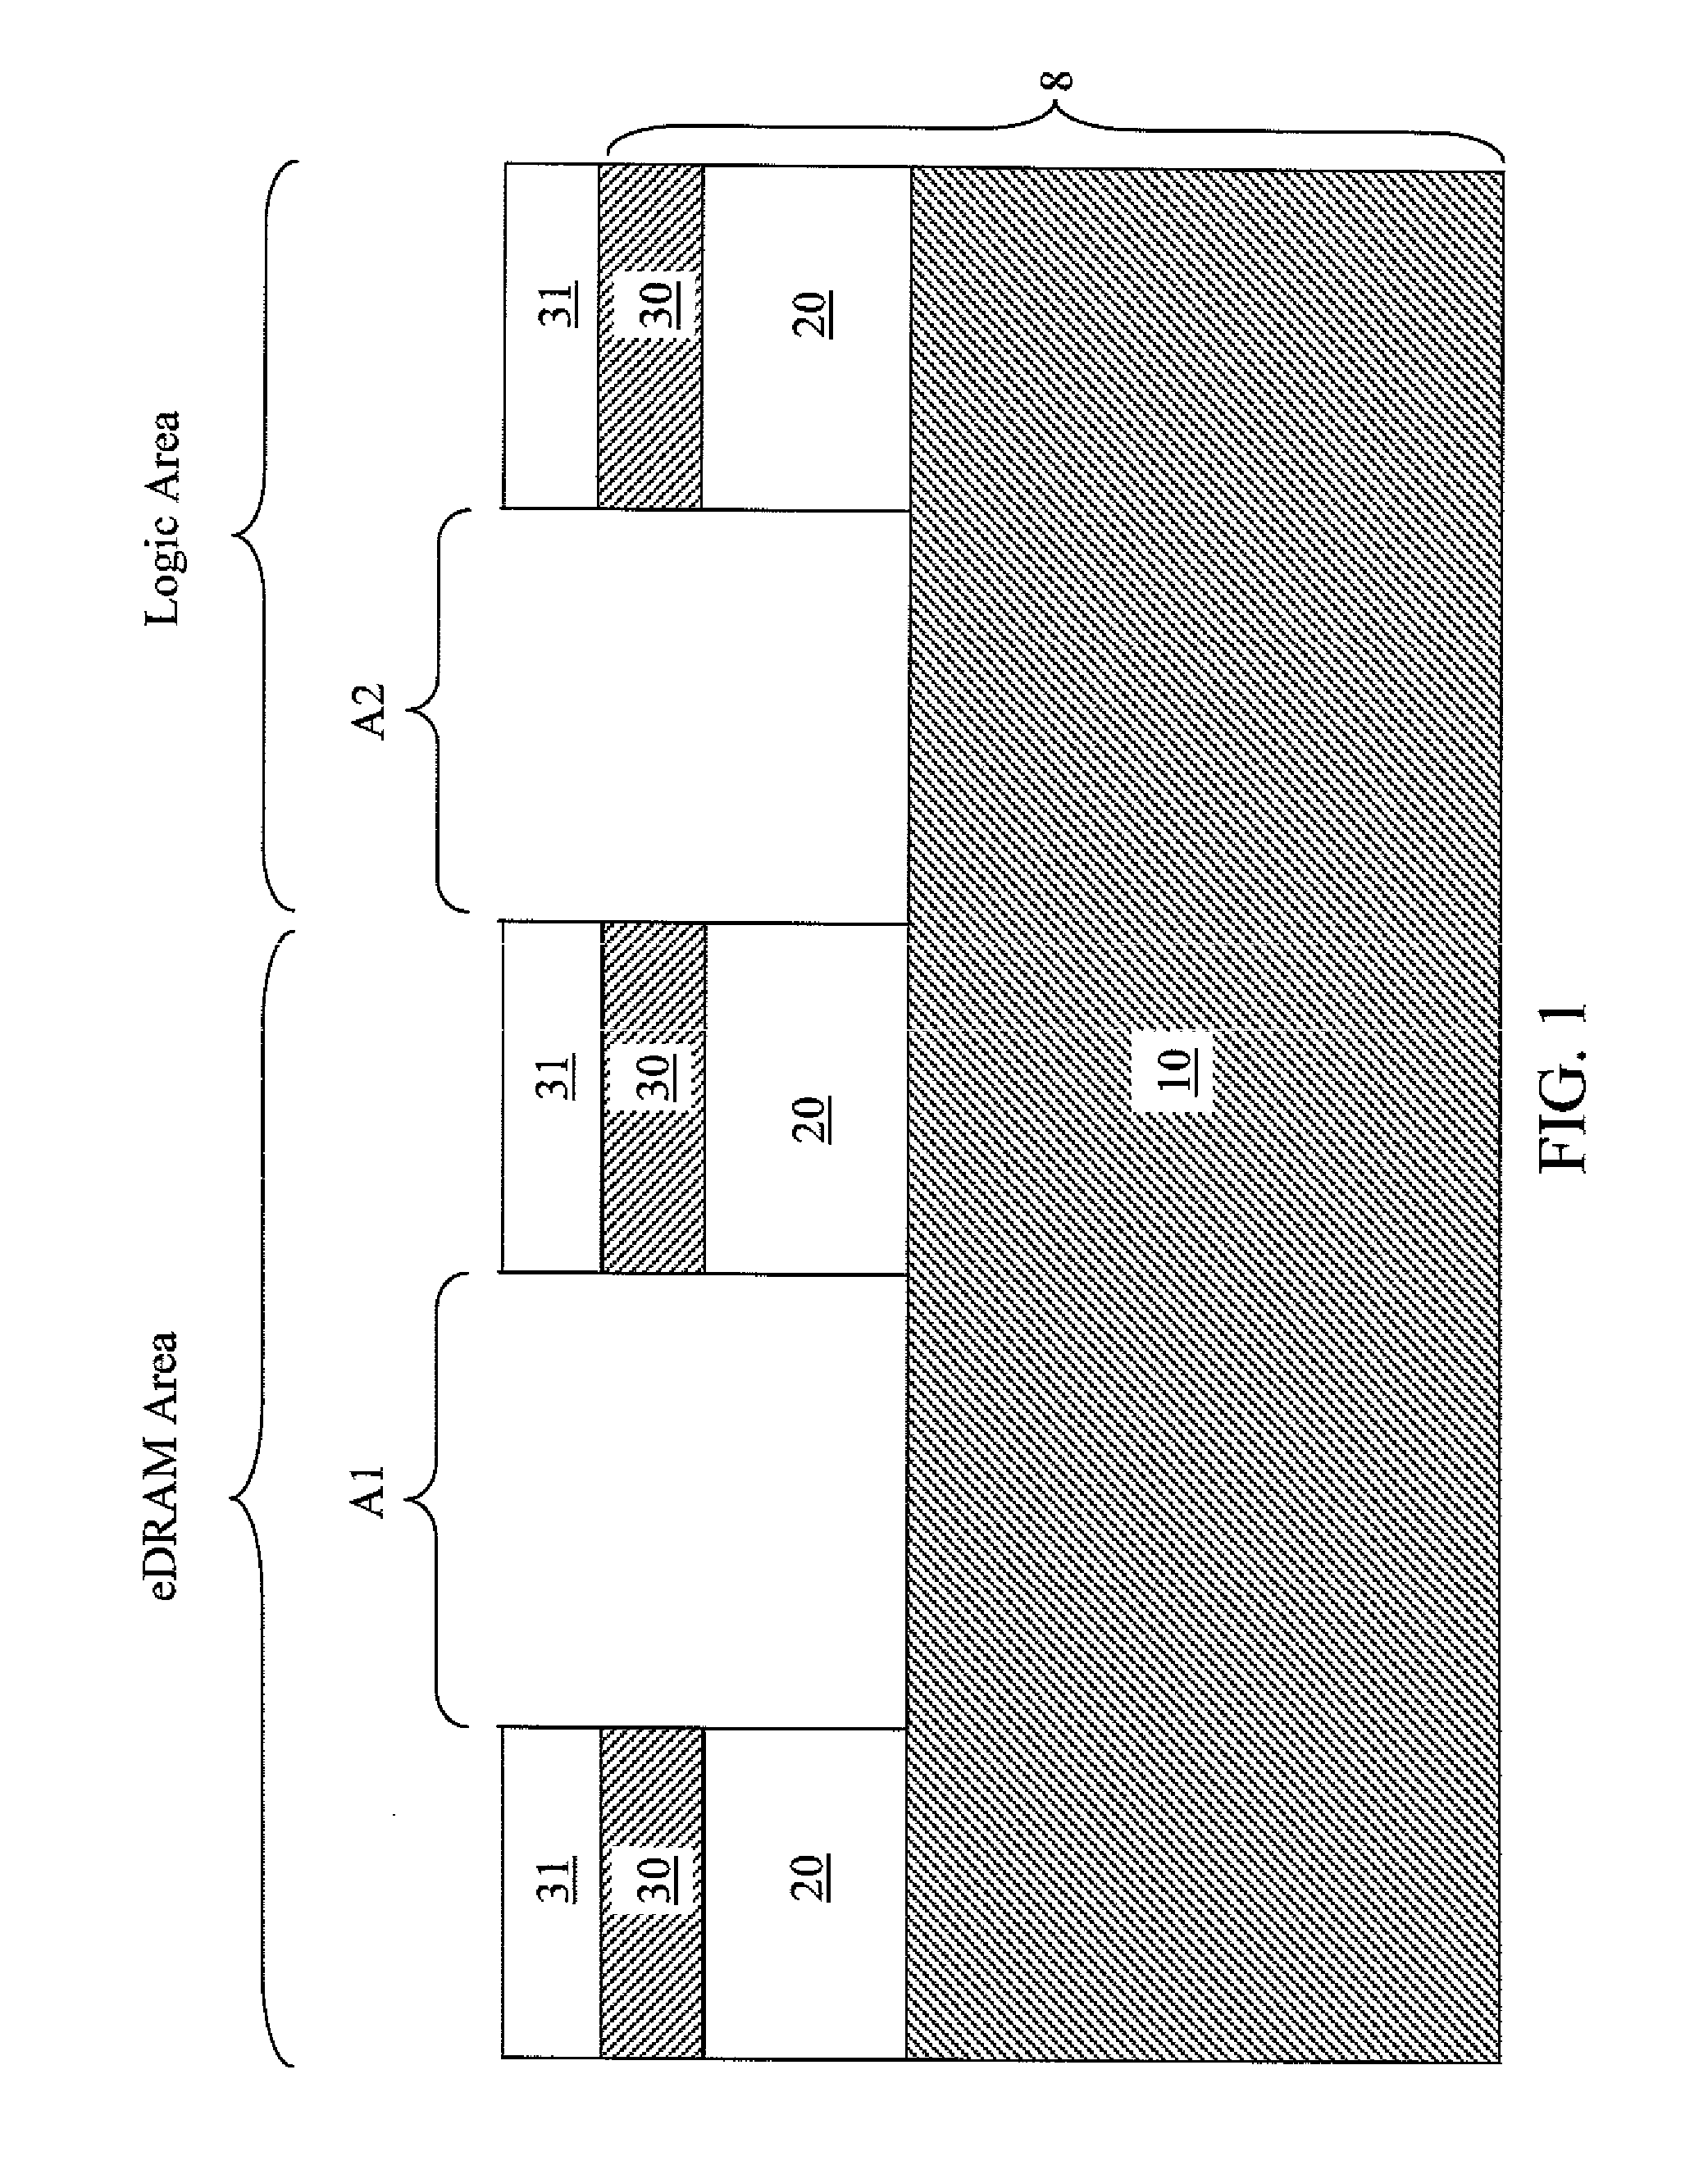 Hybrid orientation substrate compatible deep trench capacitor embedded dram